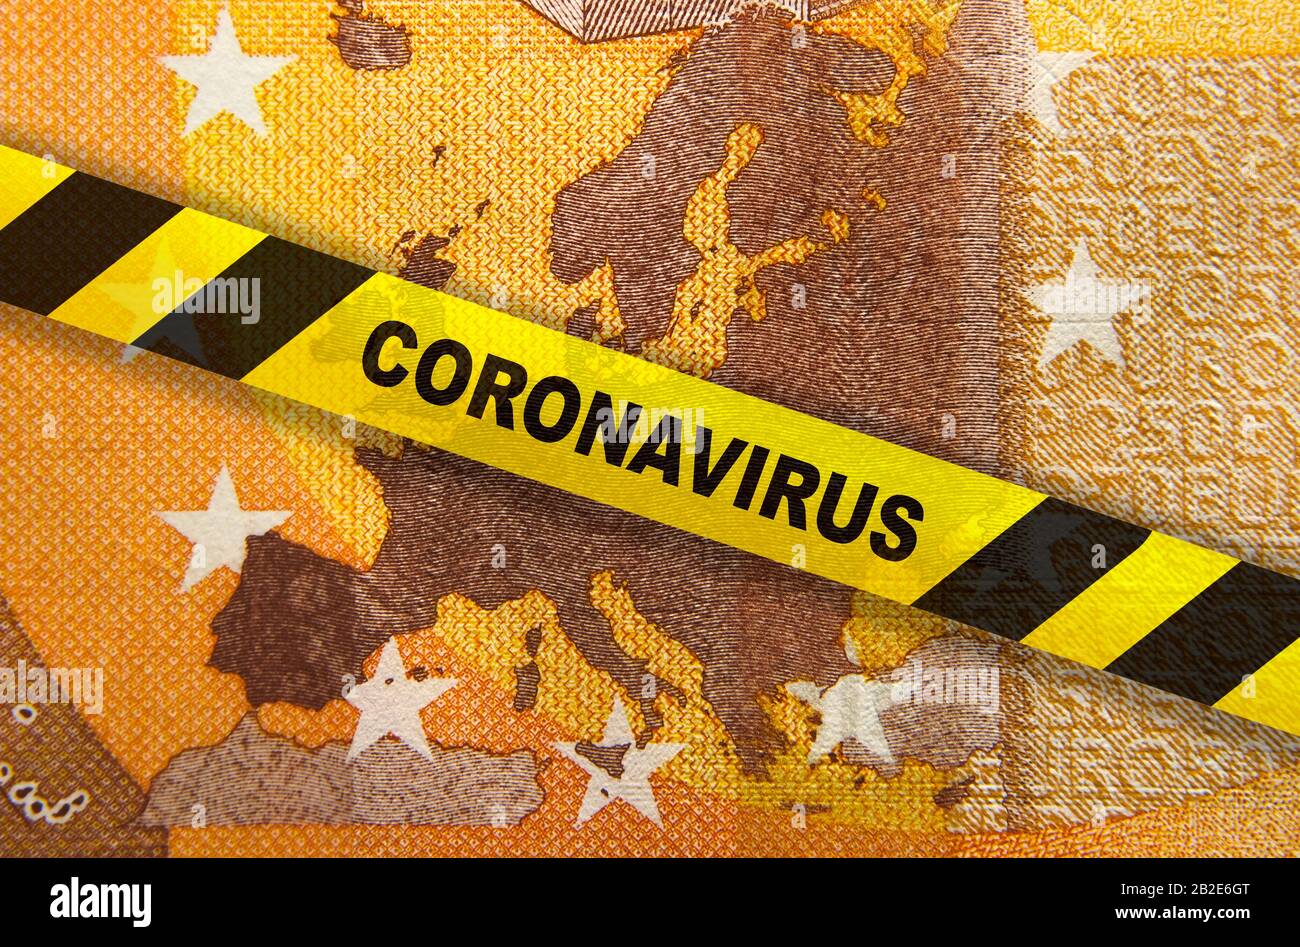 Coronavirus quarantine in Europe. Concept. 50 Euro banknote with EU map and yellow tape. Economy affected by corona virus outbreak Stock Photo